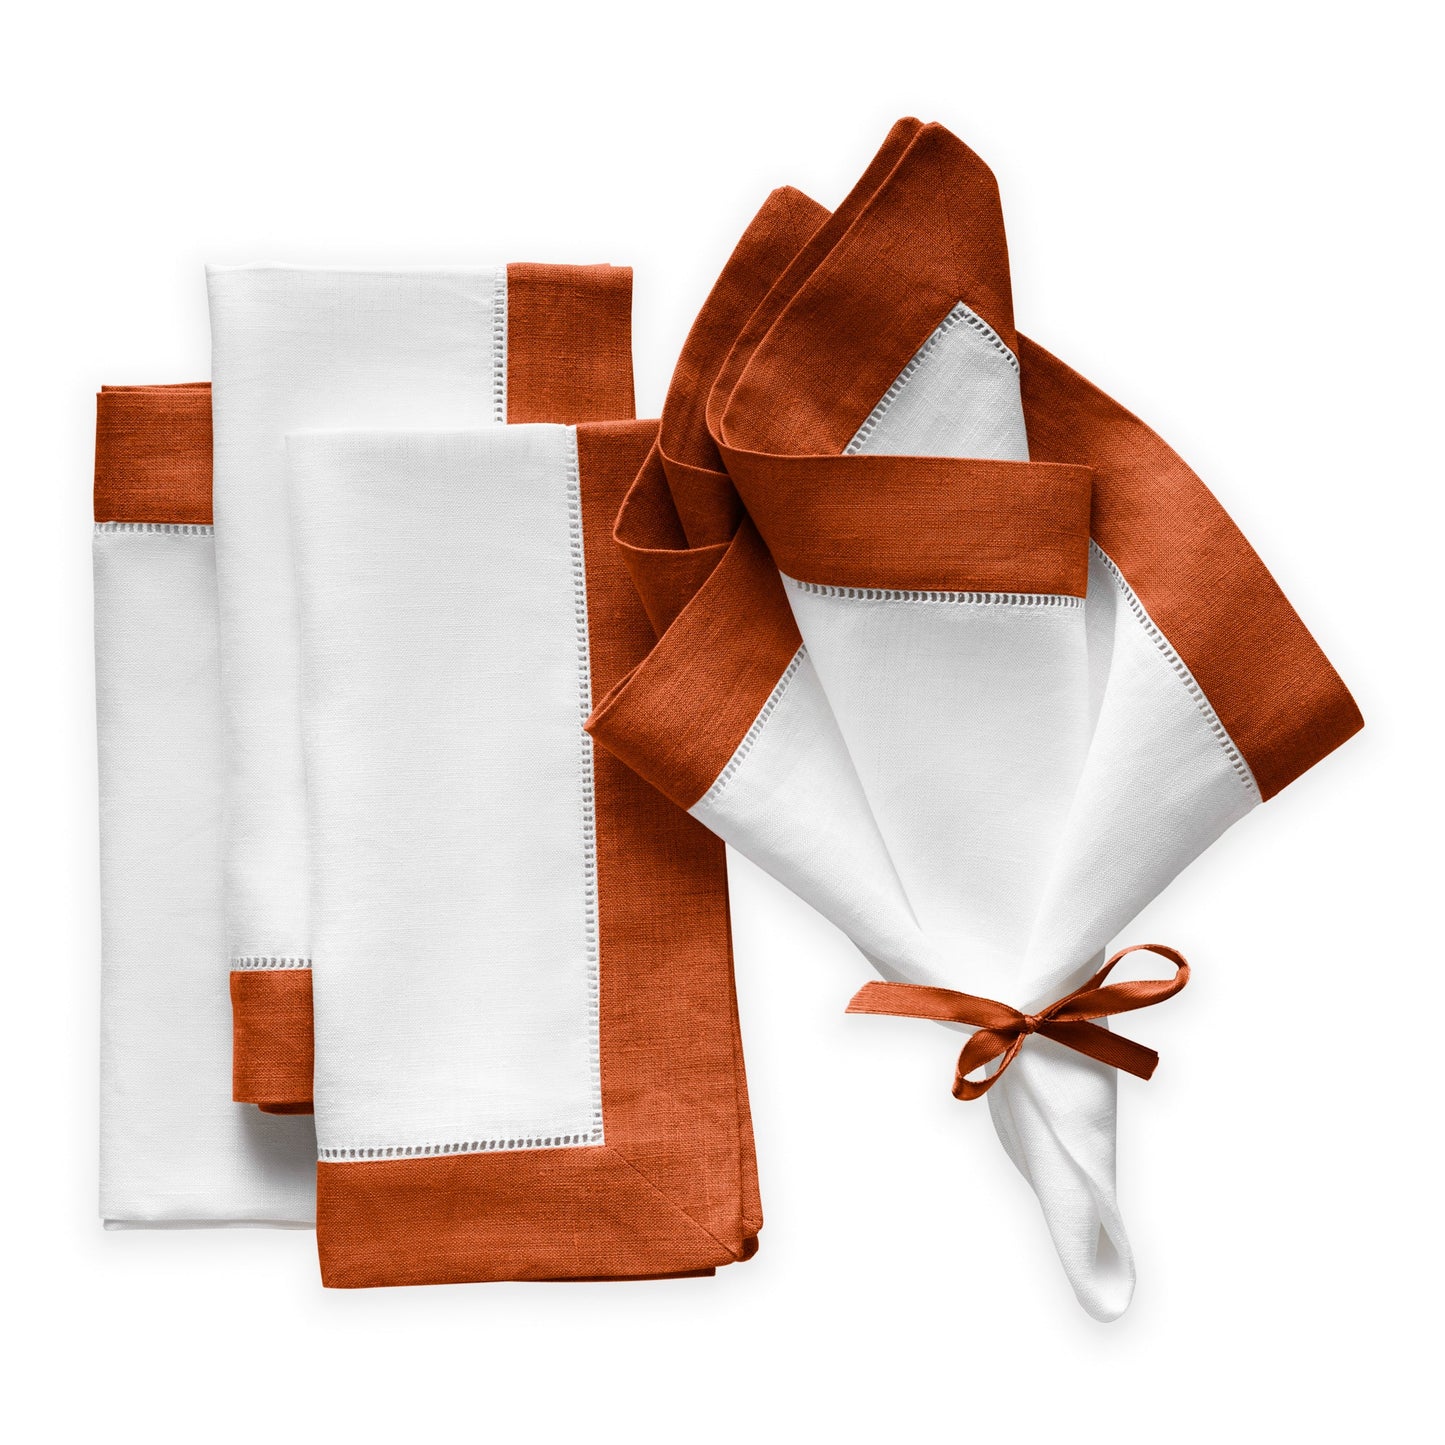 Luxe Hemstitched Bordered Linen Napkins, Red and White, Set of 4, 20 X  20 inch